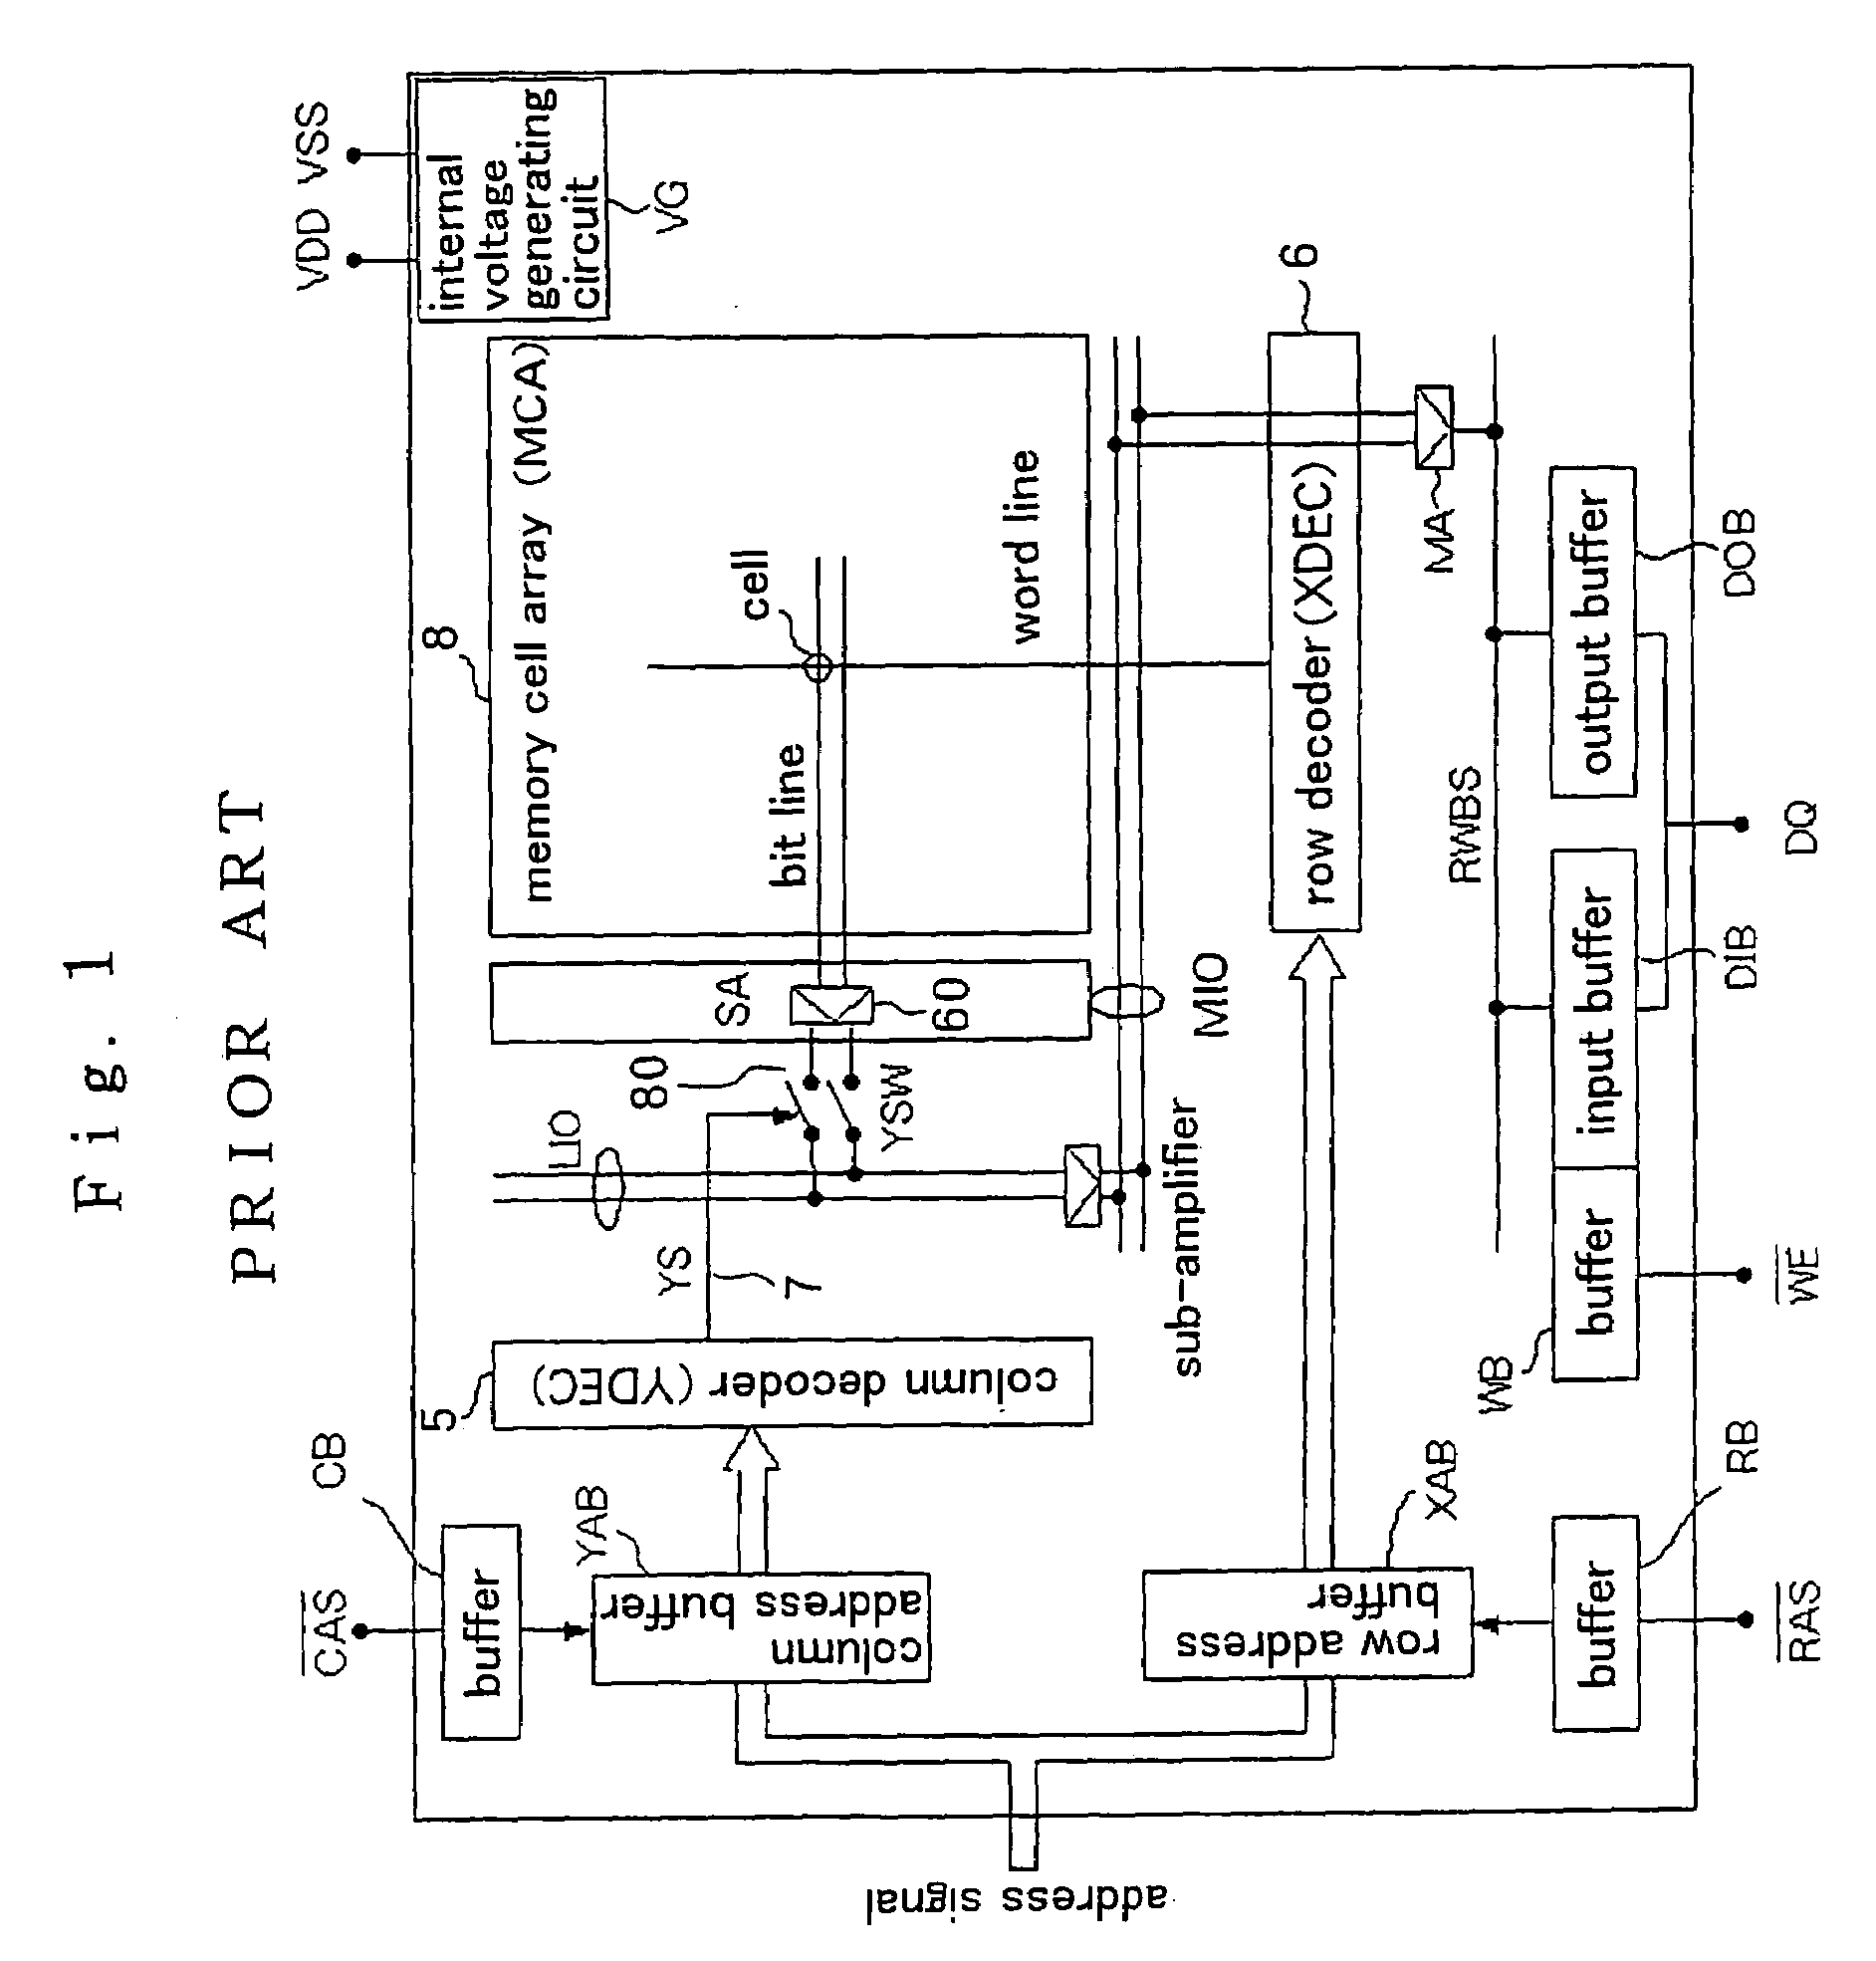 Semiconductor memory device with column selecting switches in hierarchical structure